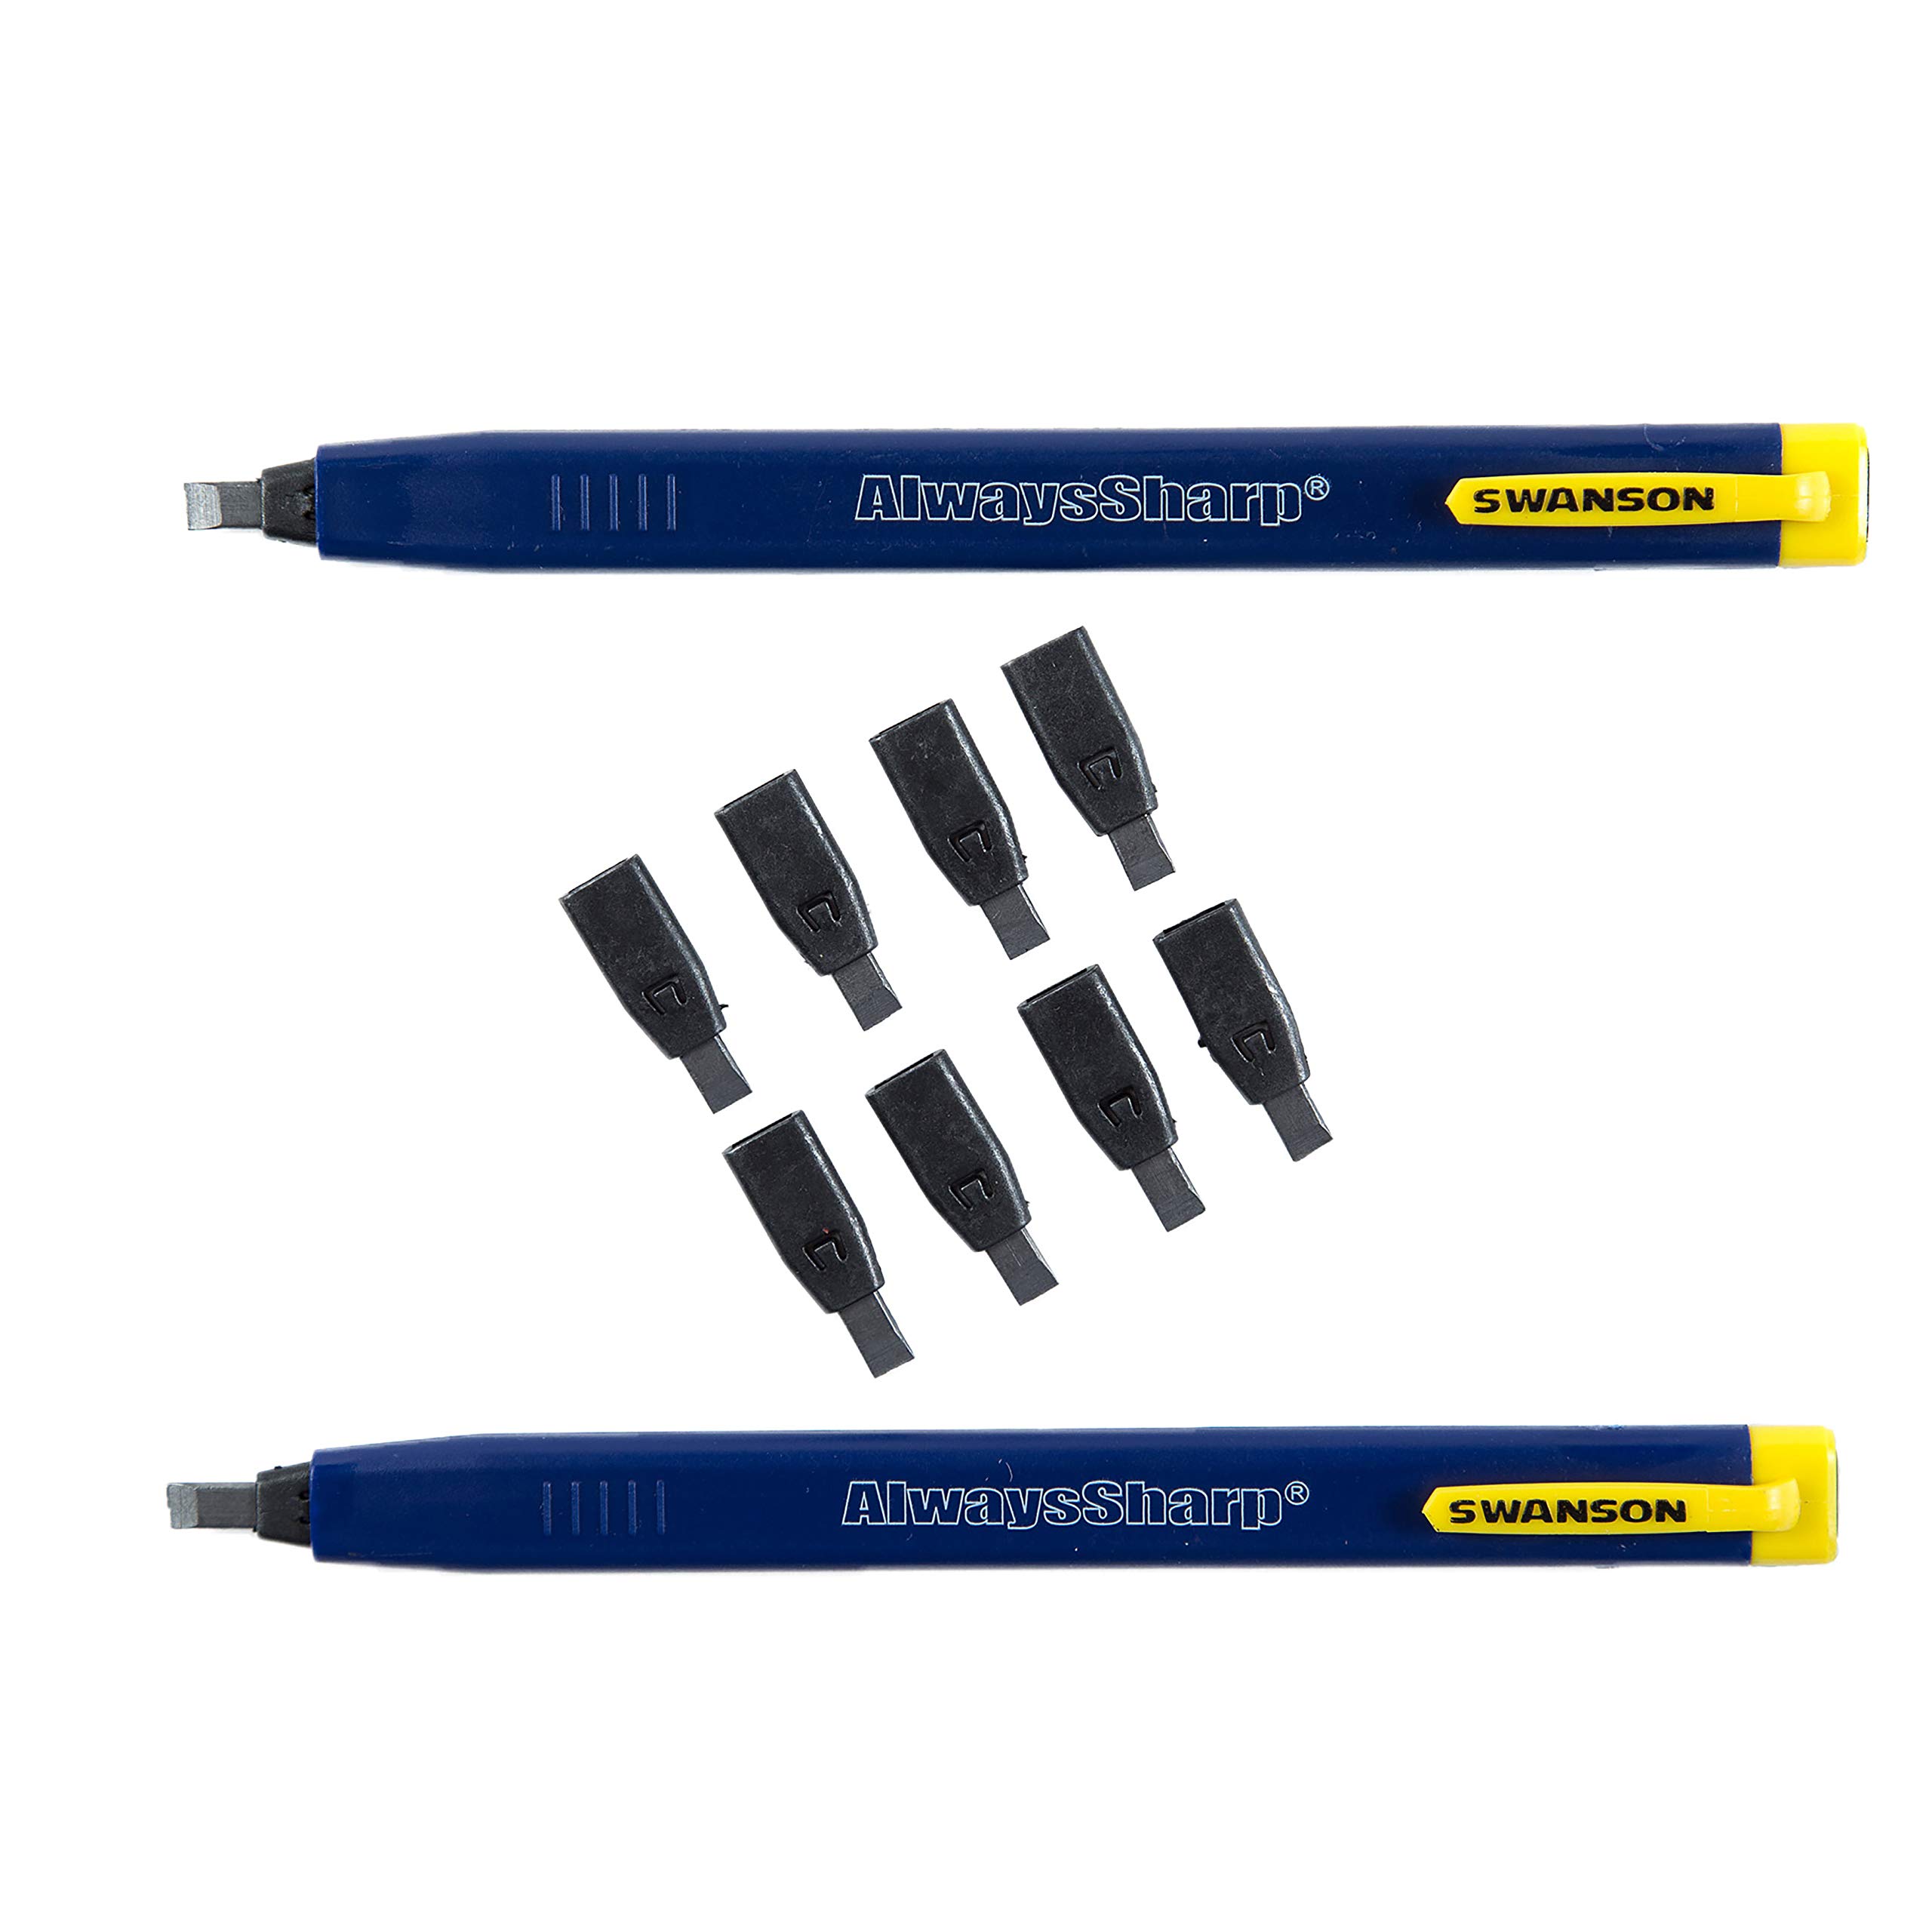 SWANSON Tool Co, Inc SW1201K Value Pack 7 inch Speed Square and Big 12 Speed Square & Swanson Tool Co CP216 AlwaysSharp Refillable Mechanical Carpenter Pencil